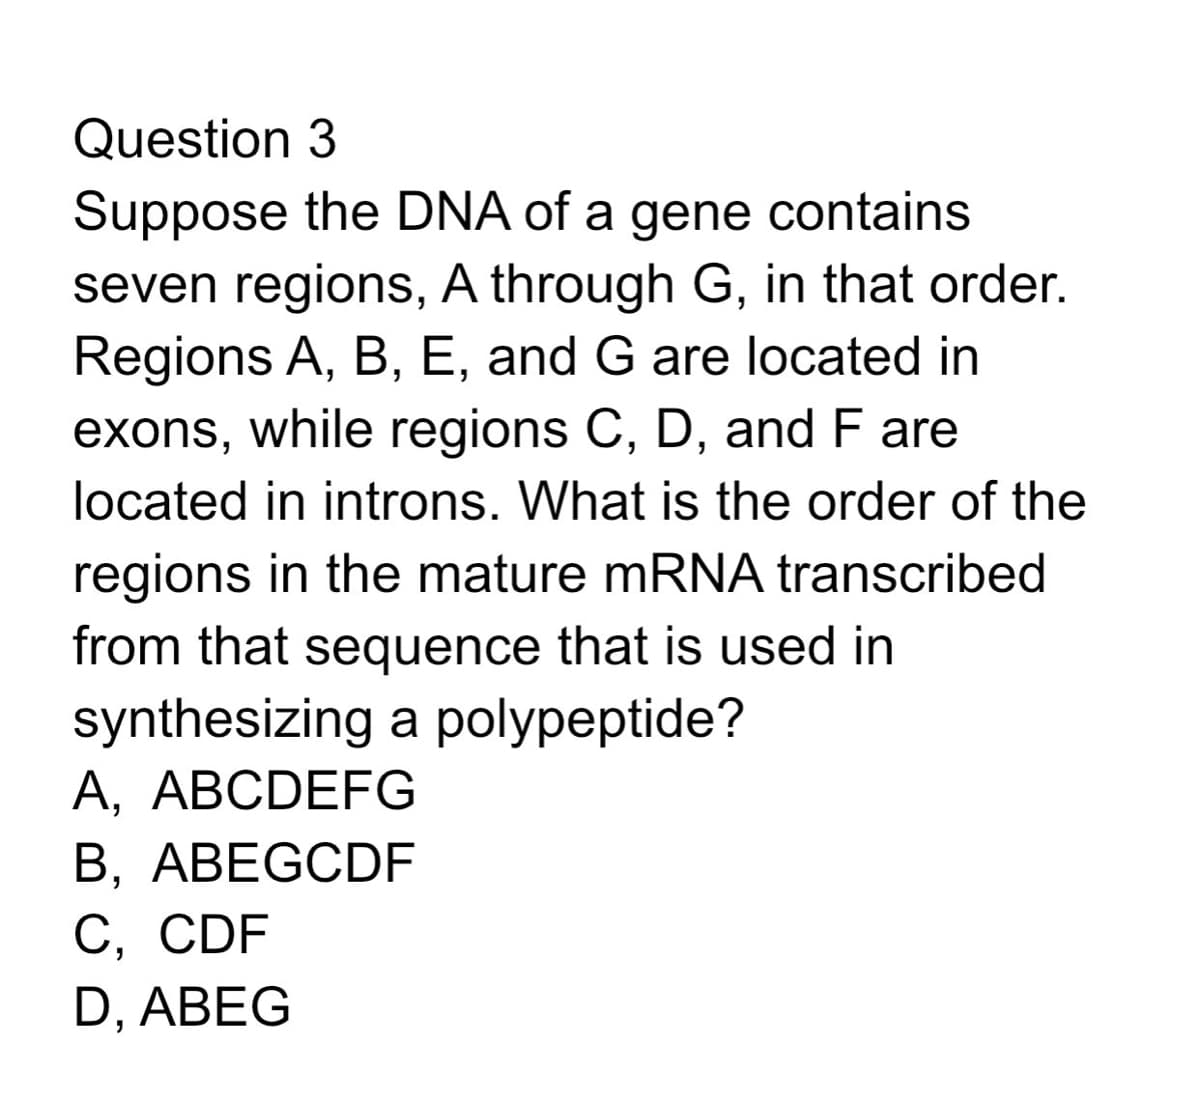 Question 3
Suppose the DNA of a gene contains
seven regions, A through G, in that order.
Regions A, B, E, and G are located in
exons, while regions C, D, and F are
located in introns. What is the order of the
regions in the mature mRNA transcribed
from that sequence that is used in
synthesizing a polypeptide?
A, ABCDEFG
B, ABEGCDF
C, CDF
D, ABEG